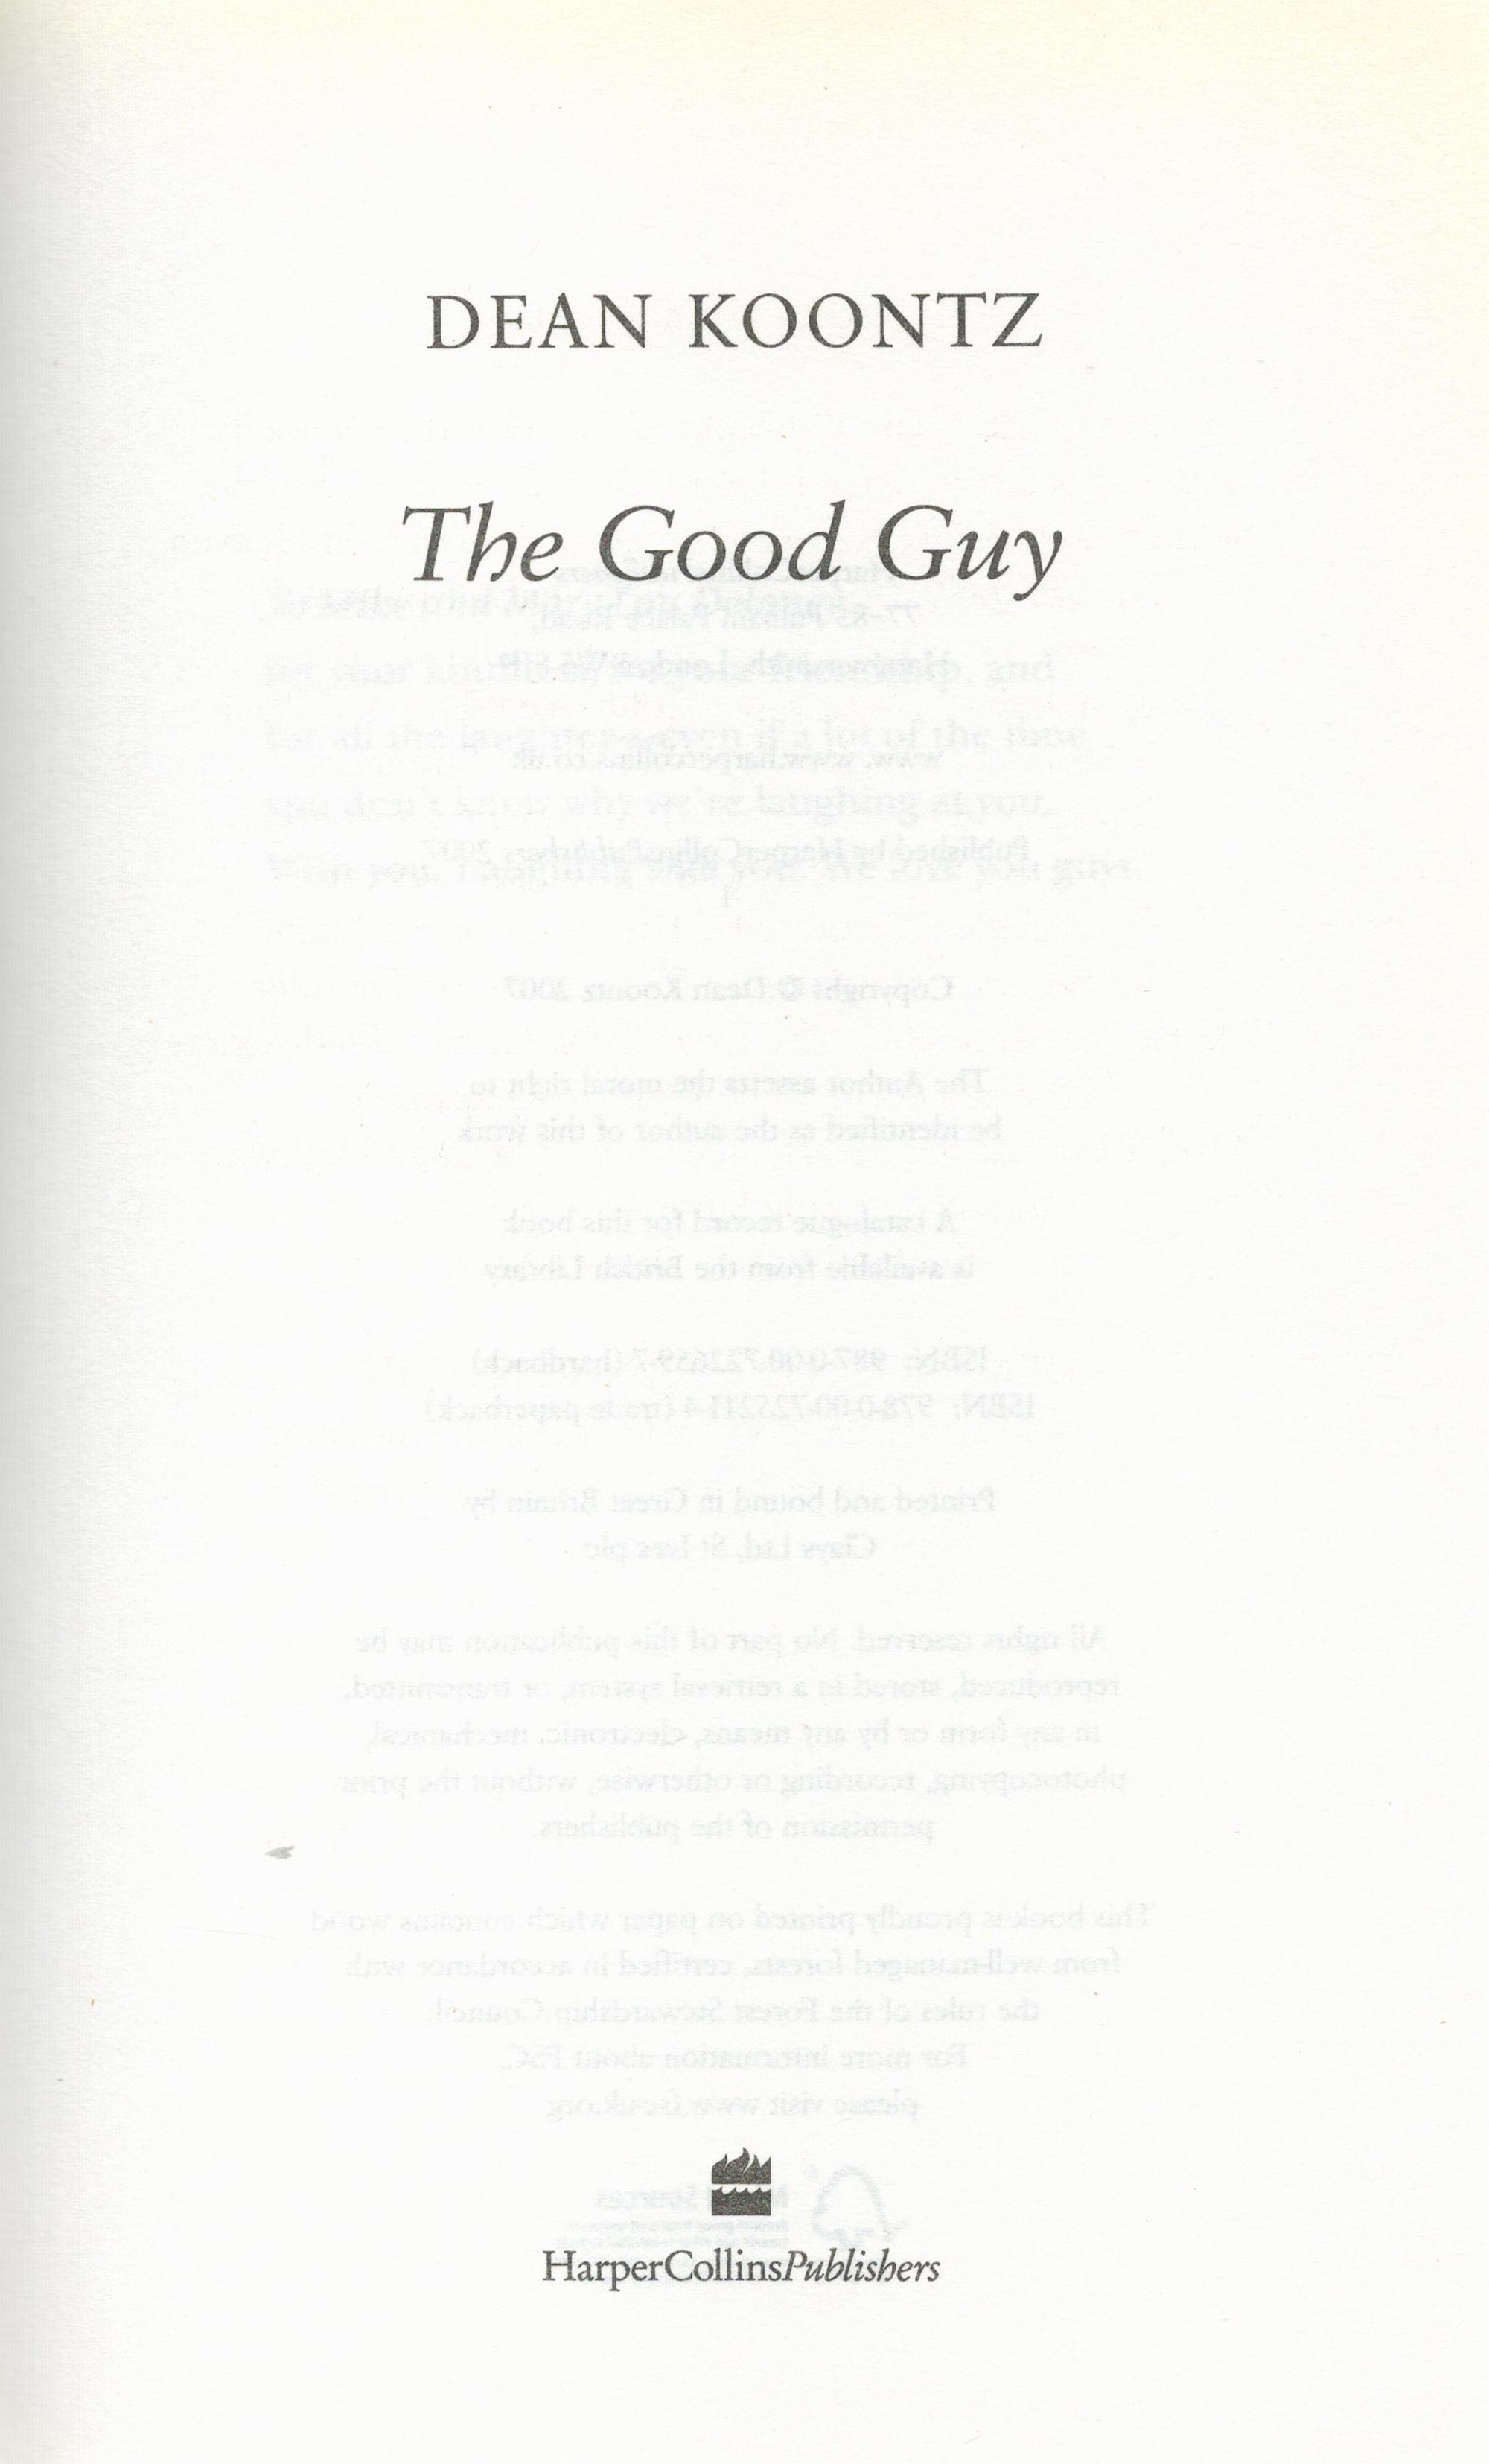 The Good Guy by Dean R Koontz Hardback Book 2007 First Edition published by Harper Collins some - Image 4 of 6